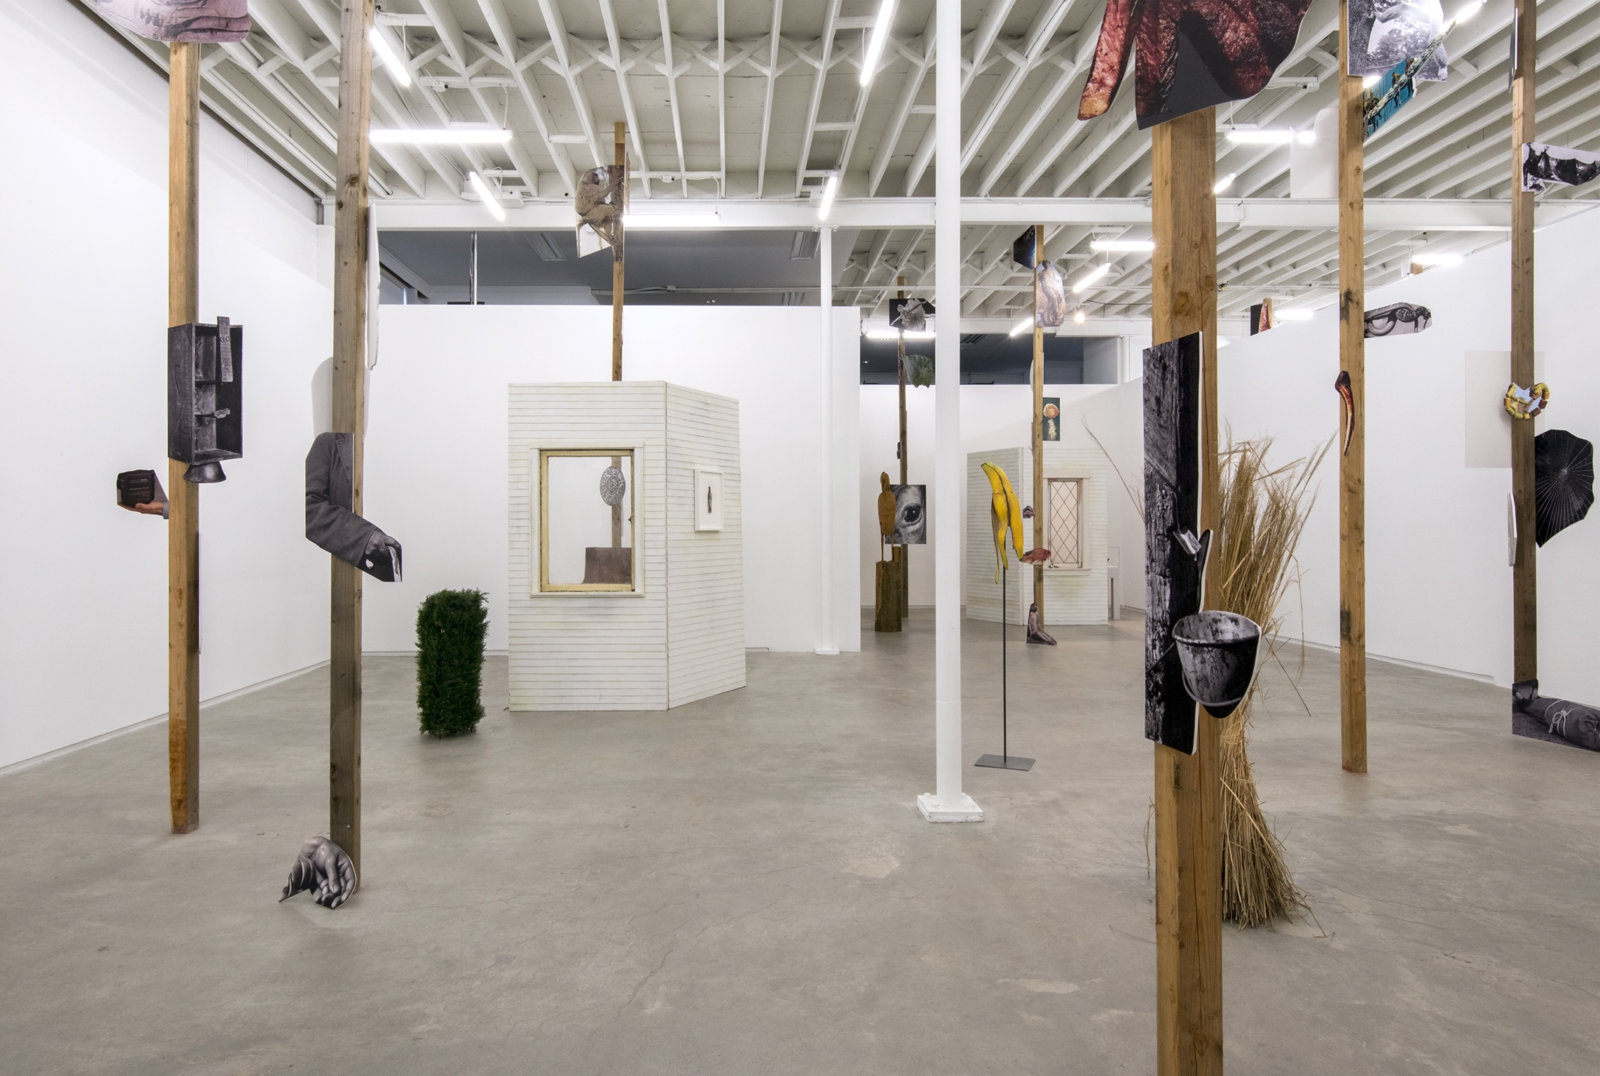 Geoffrey Farmer, installation view, The Grass and the Banana go for a walk, Catriona Jeffries, 2014